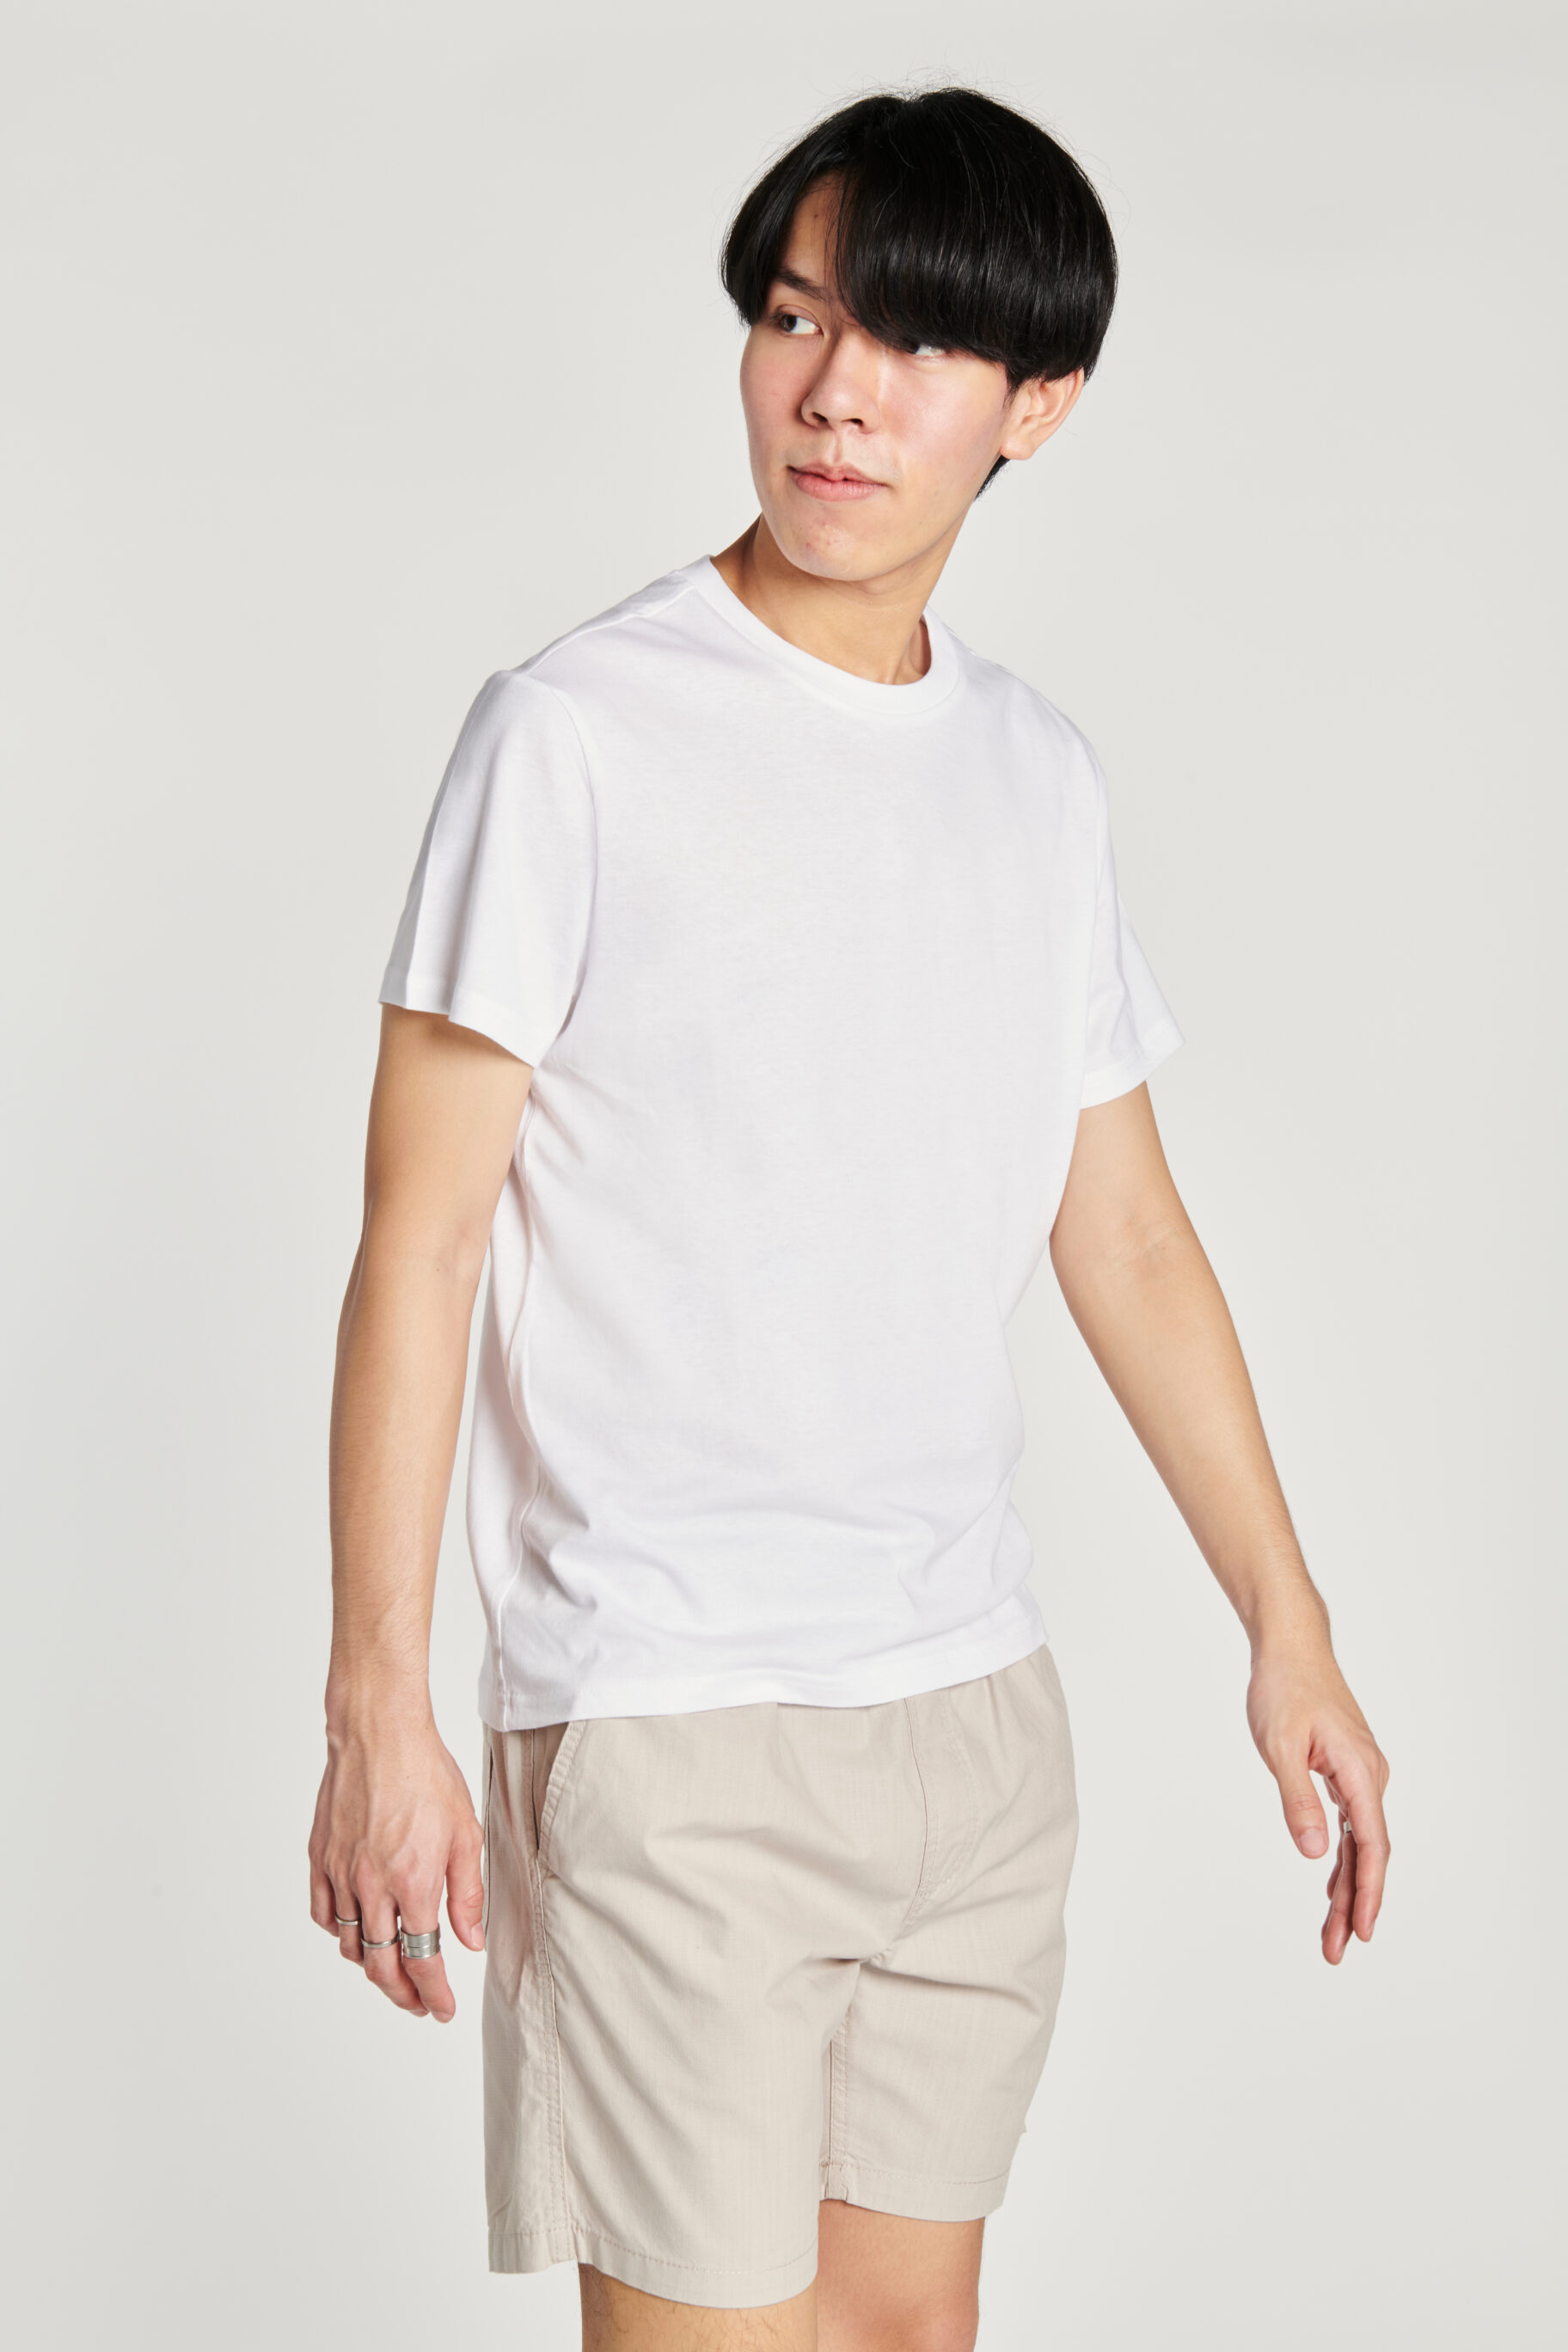 White T-shirt with Short Pant